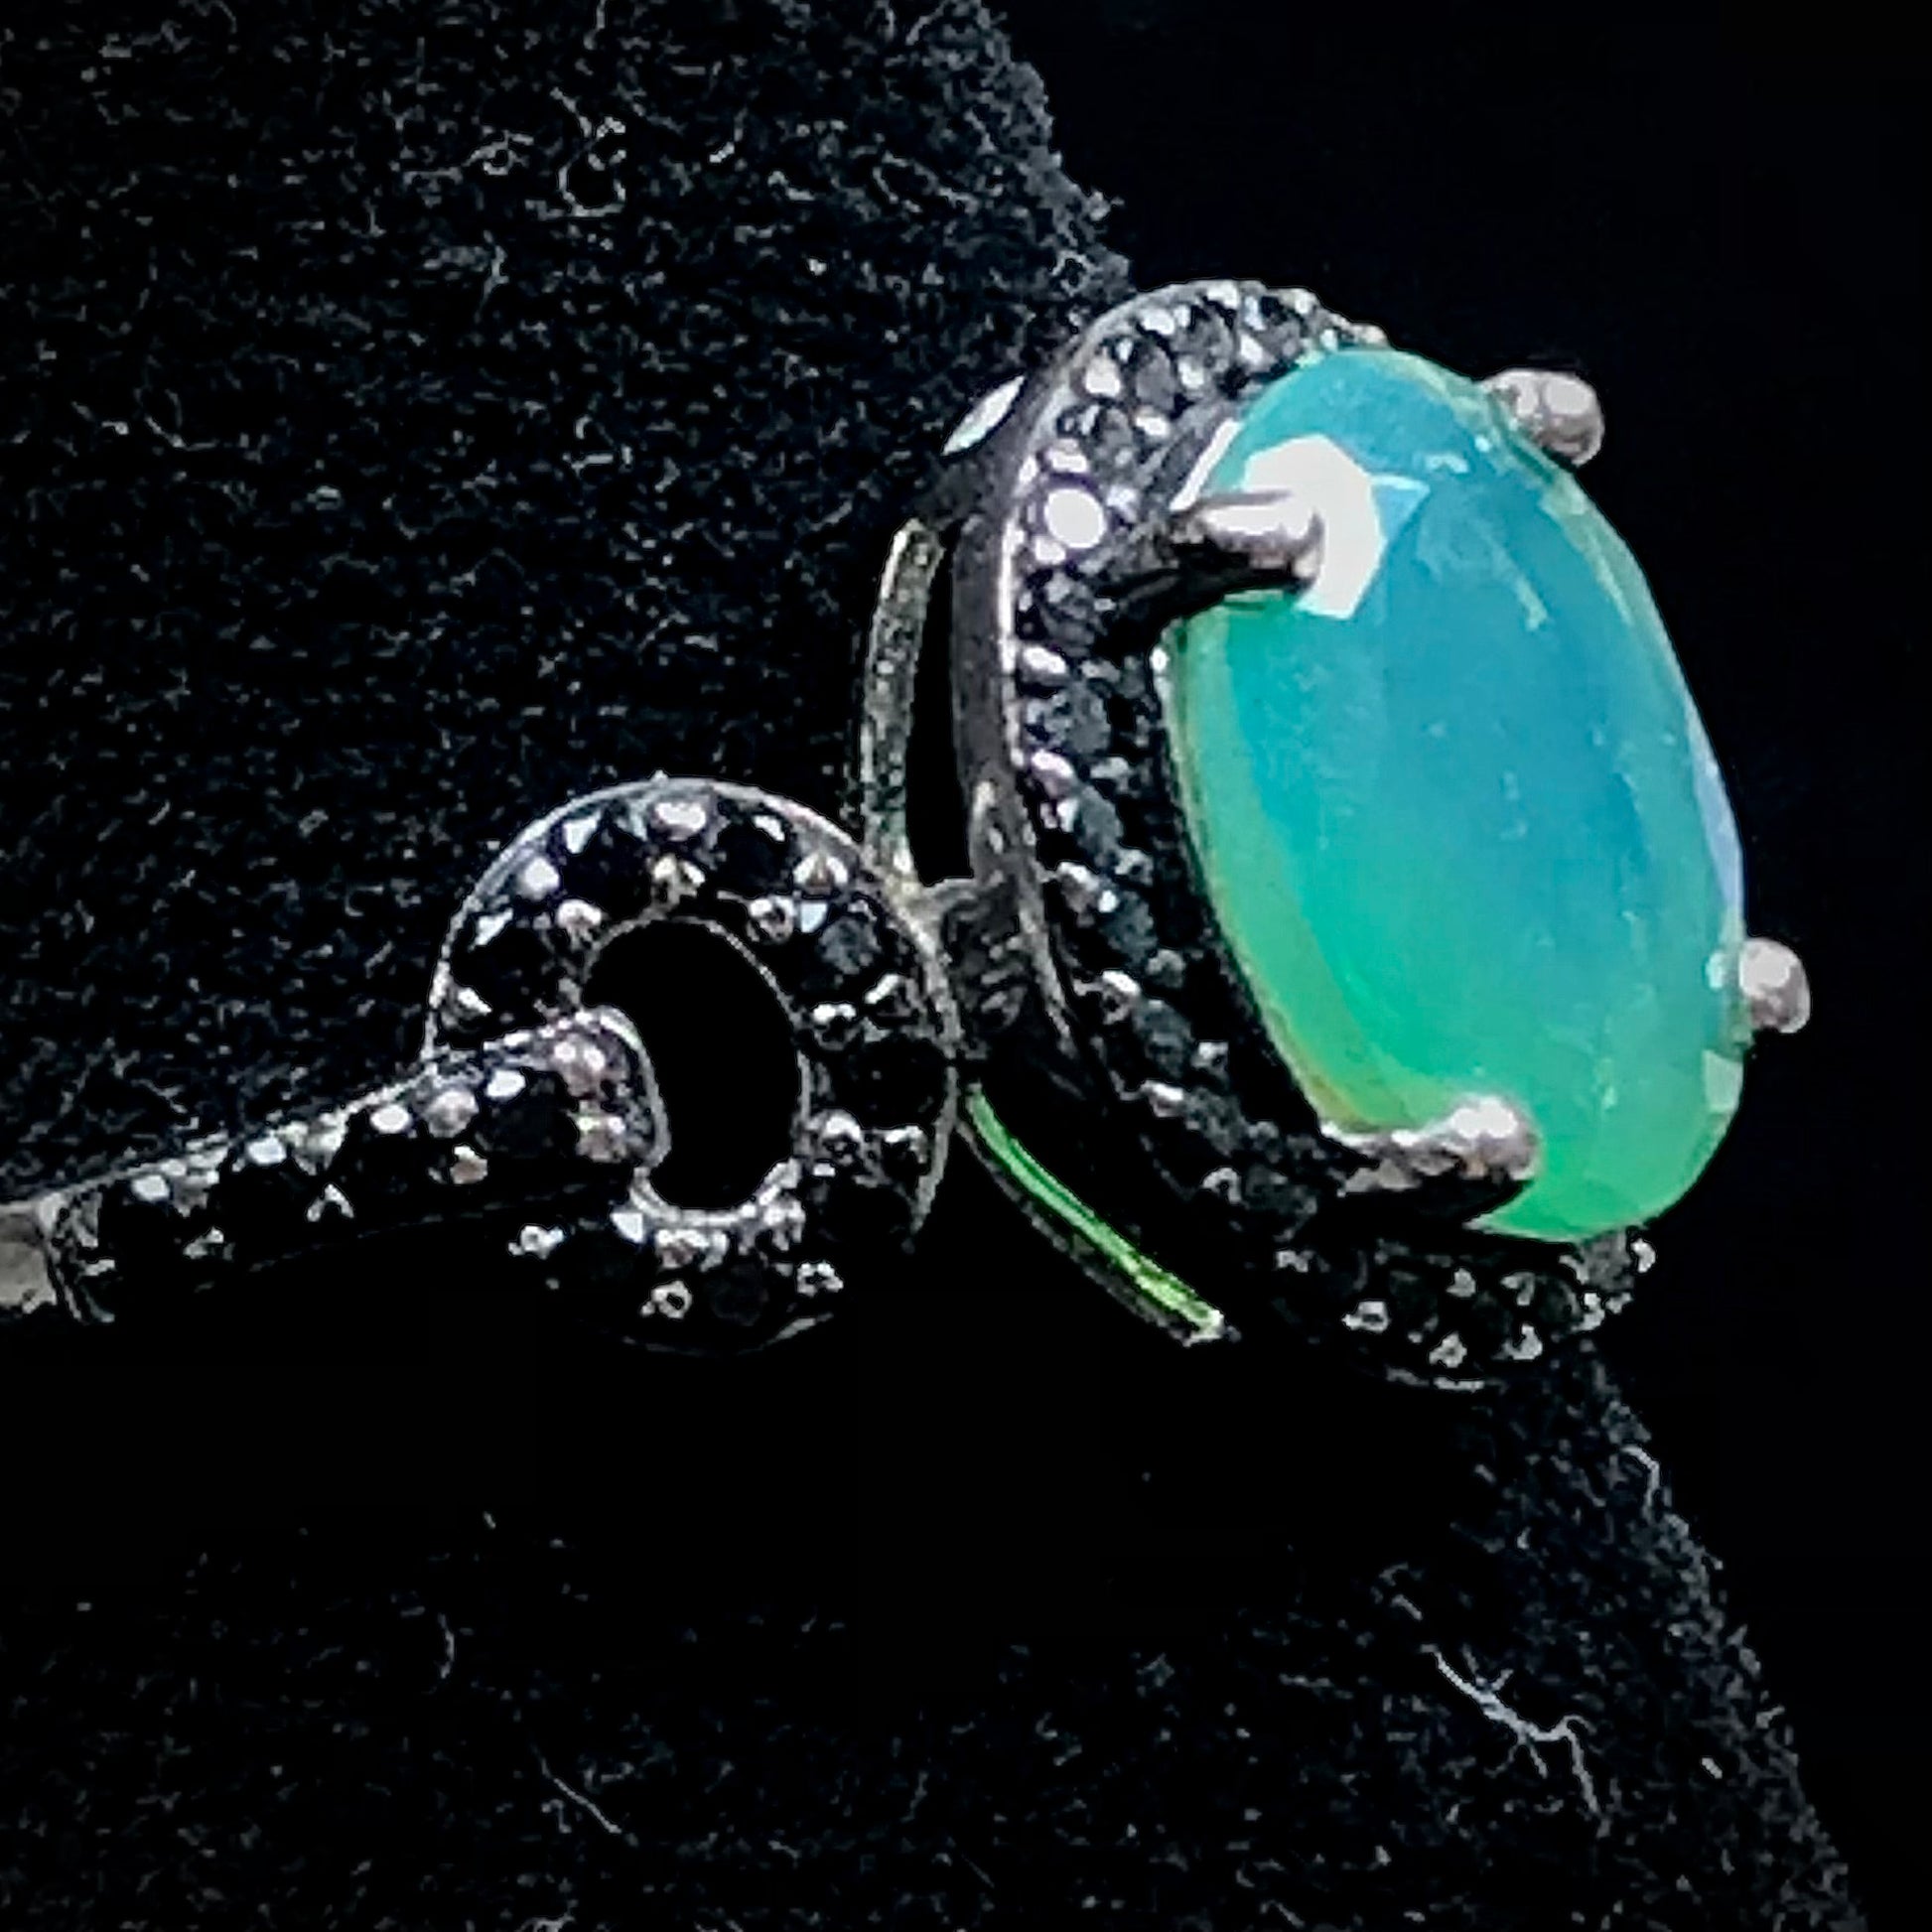 Dyed Ethiopian opal and black spinel prong set into a sterling silver ring.